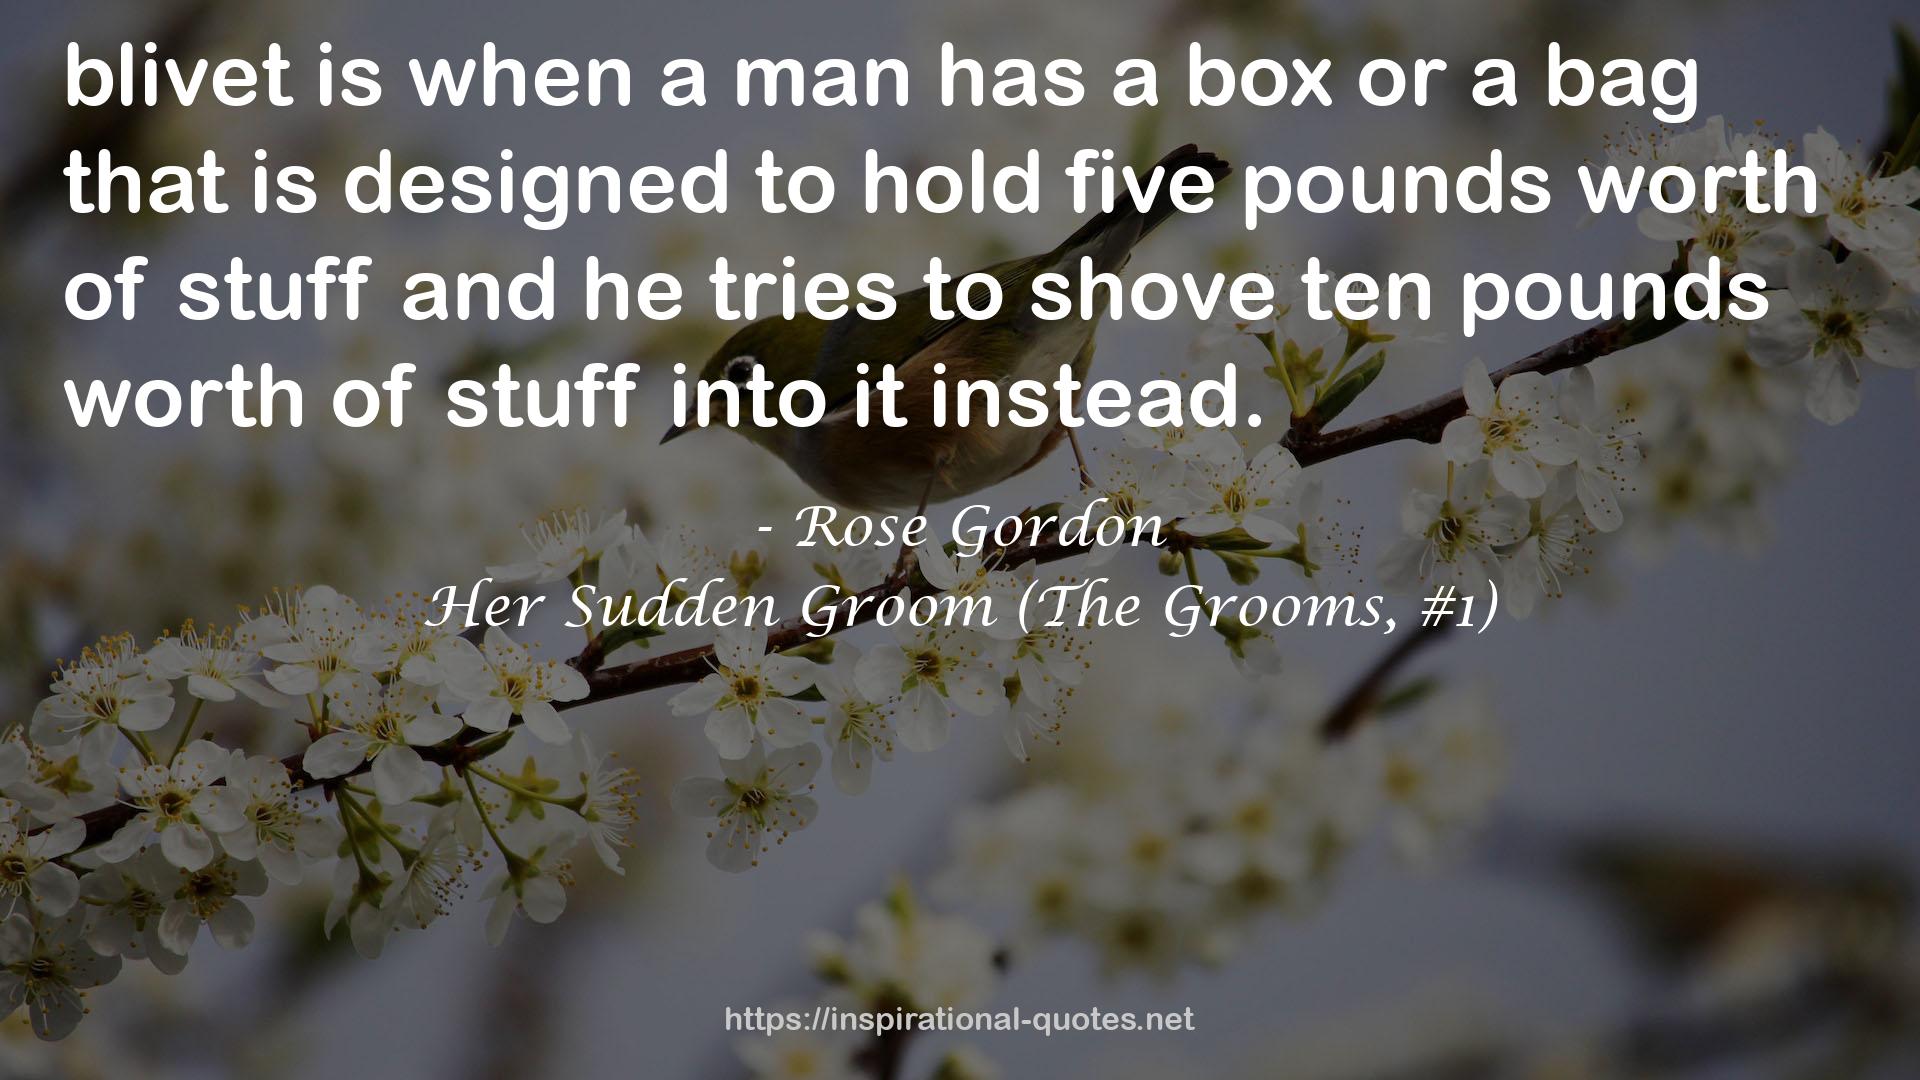 Her Sudden Groom (The Grooms, #1) QUOTES